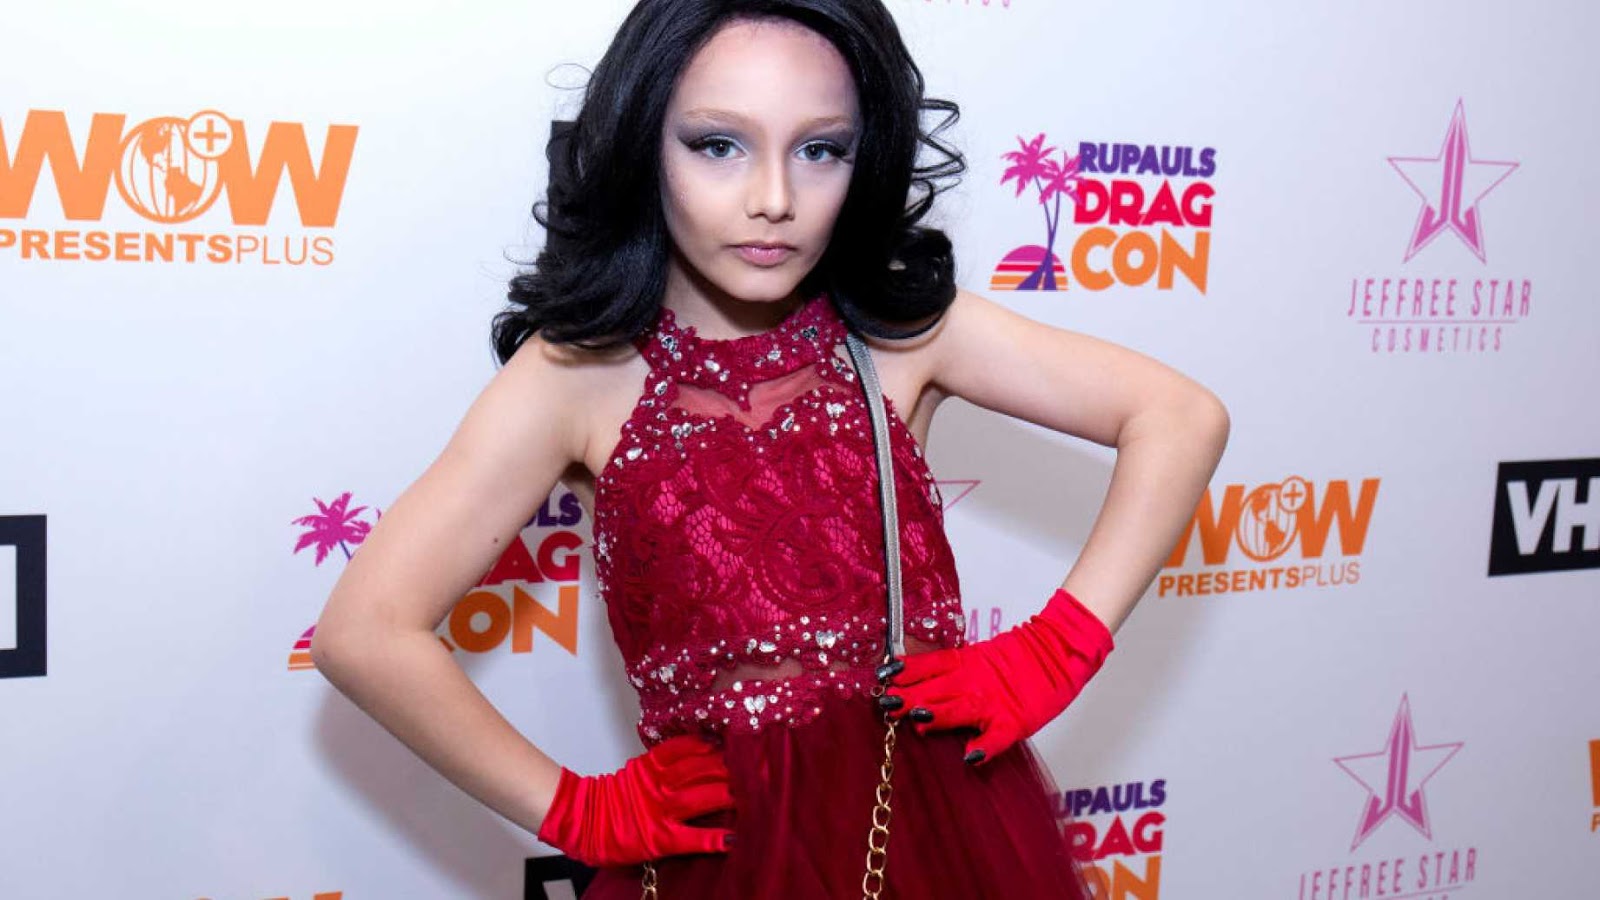 10-Year-Old Child Drag Star Photographed Posing with 